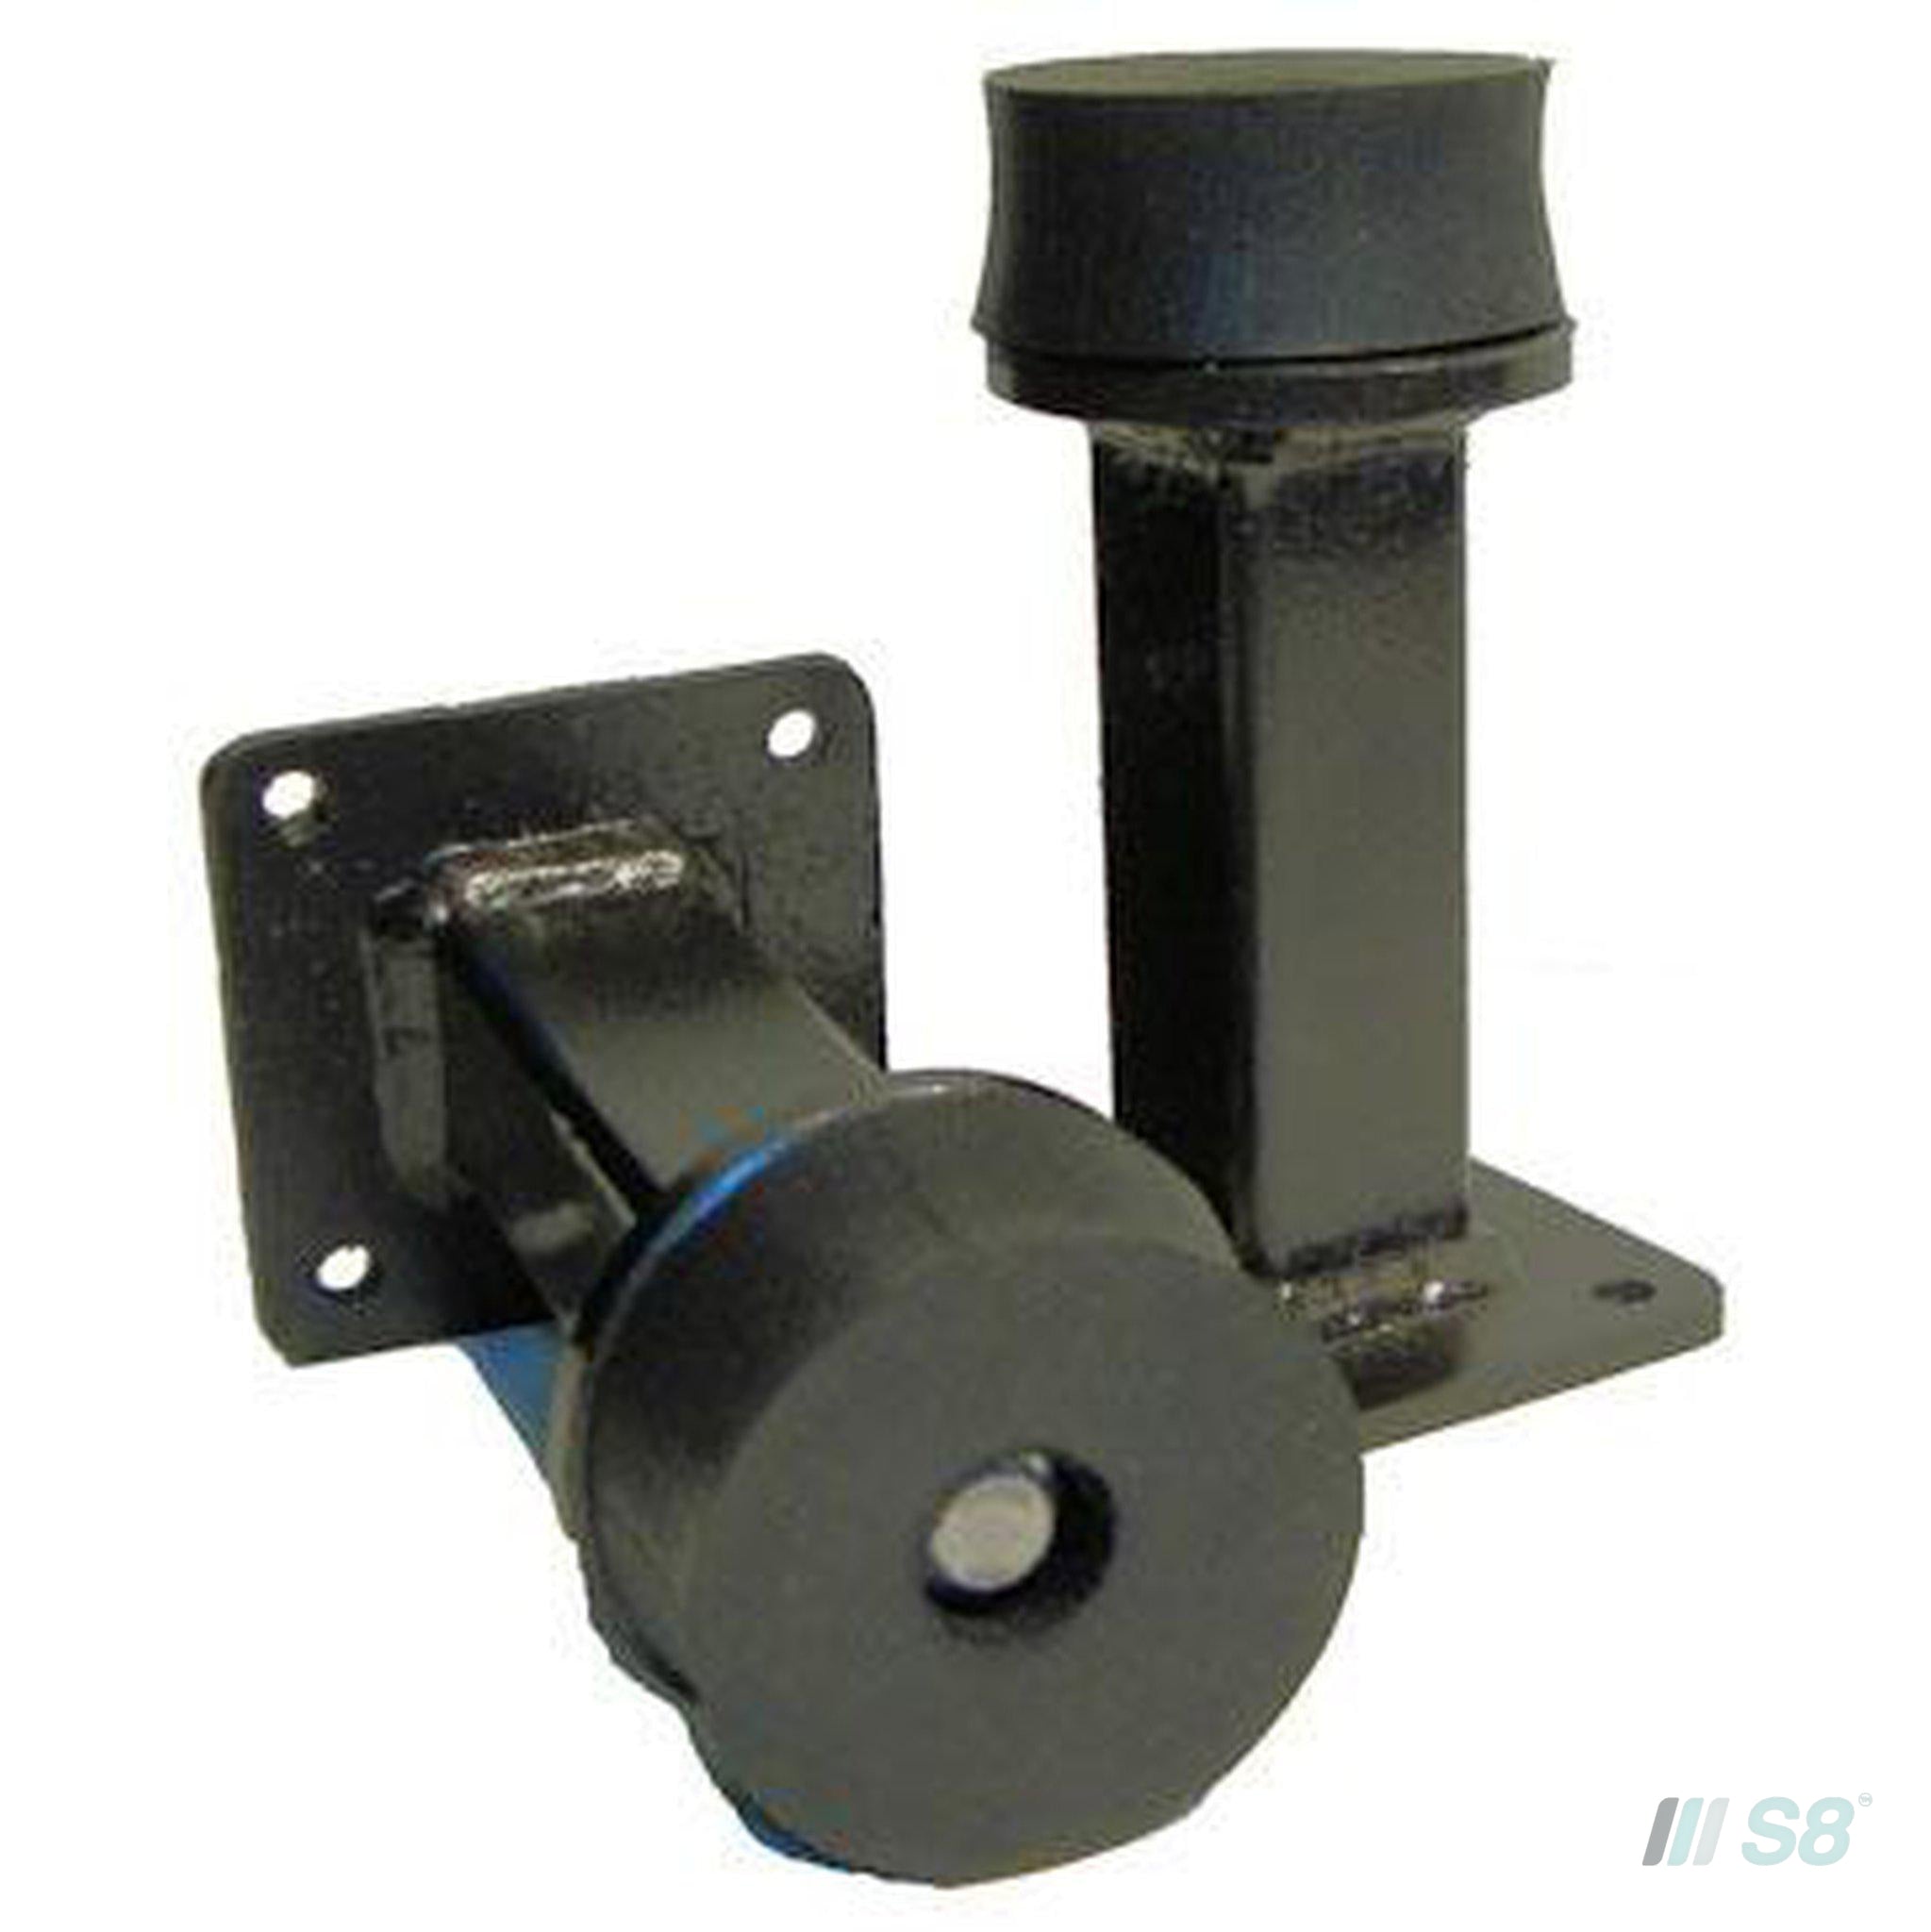 BTI Door Stops-BTI-S8 Products Group